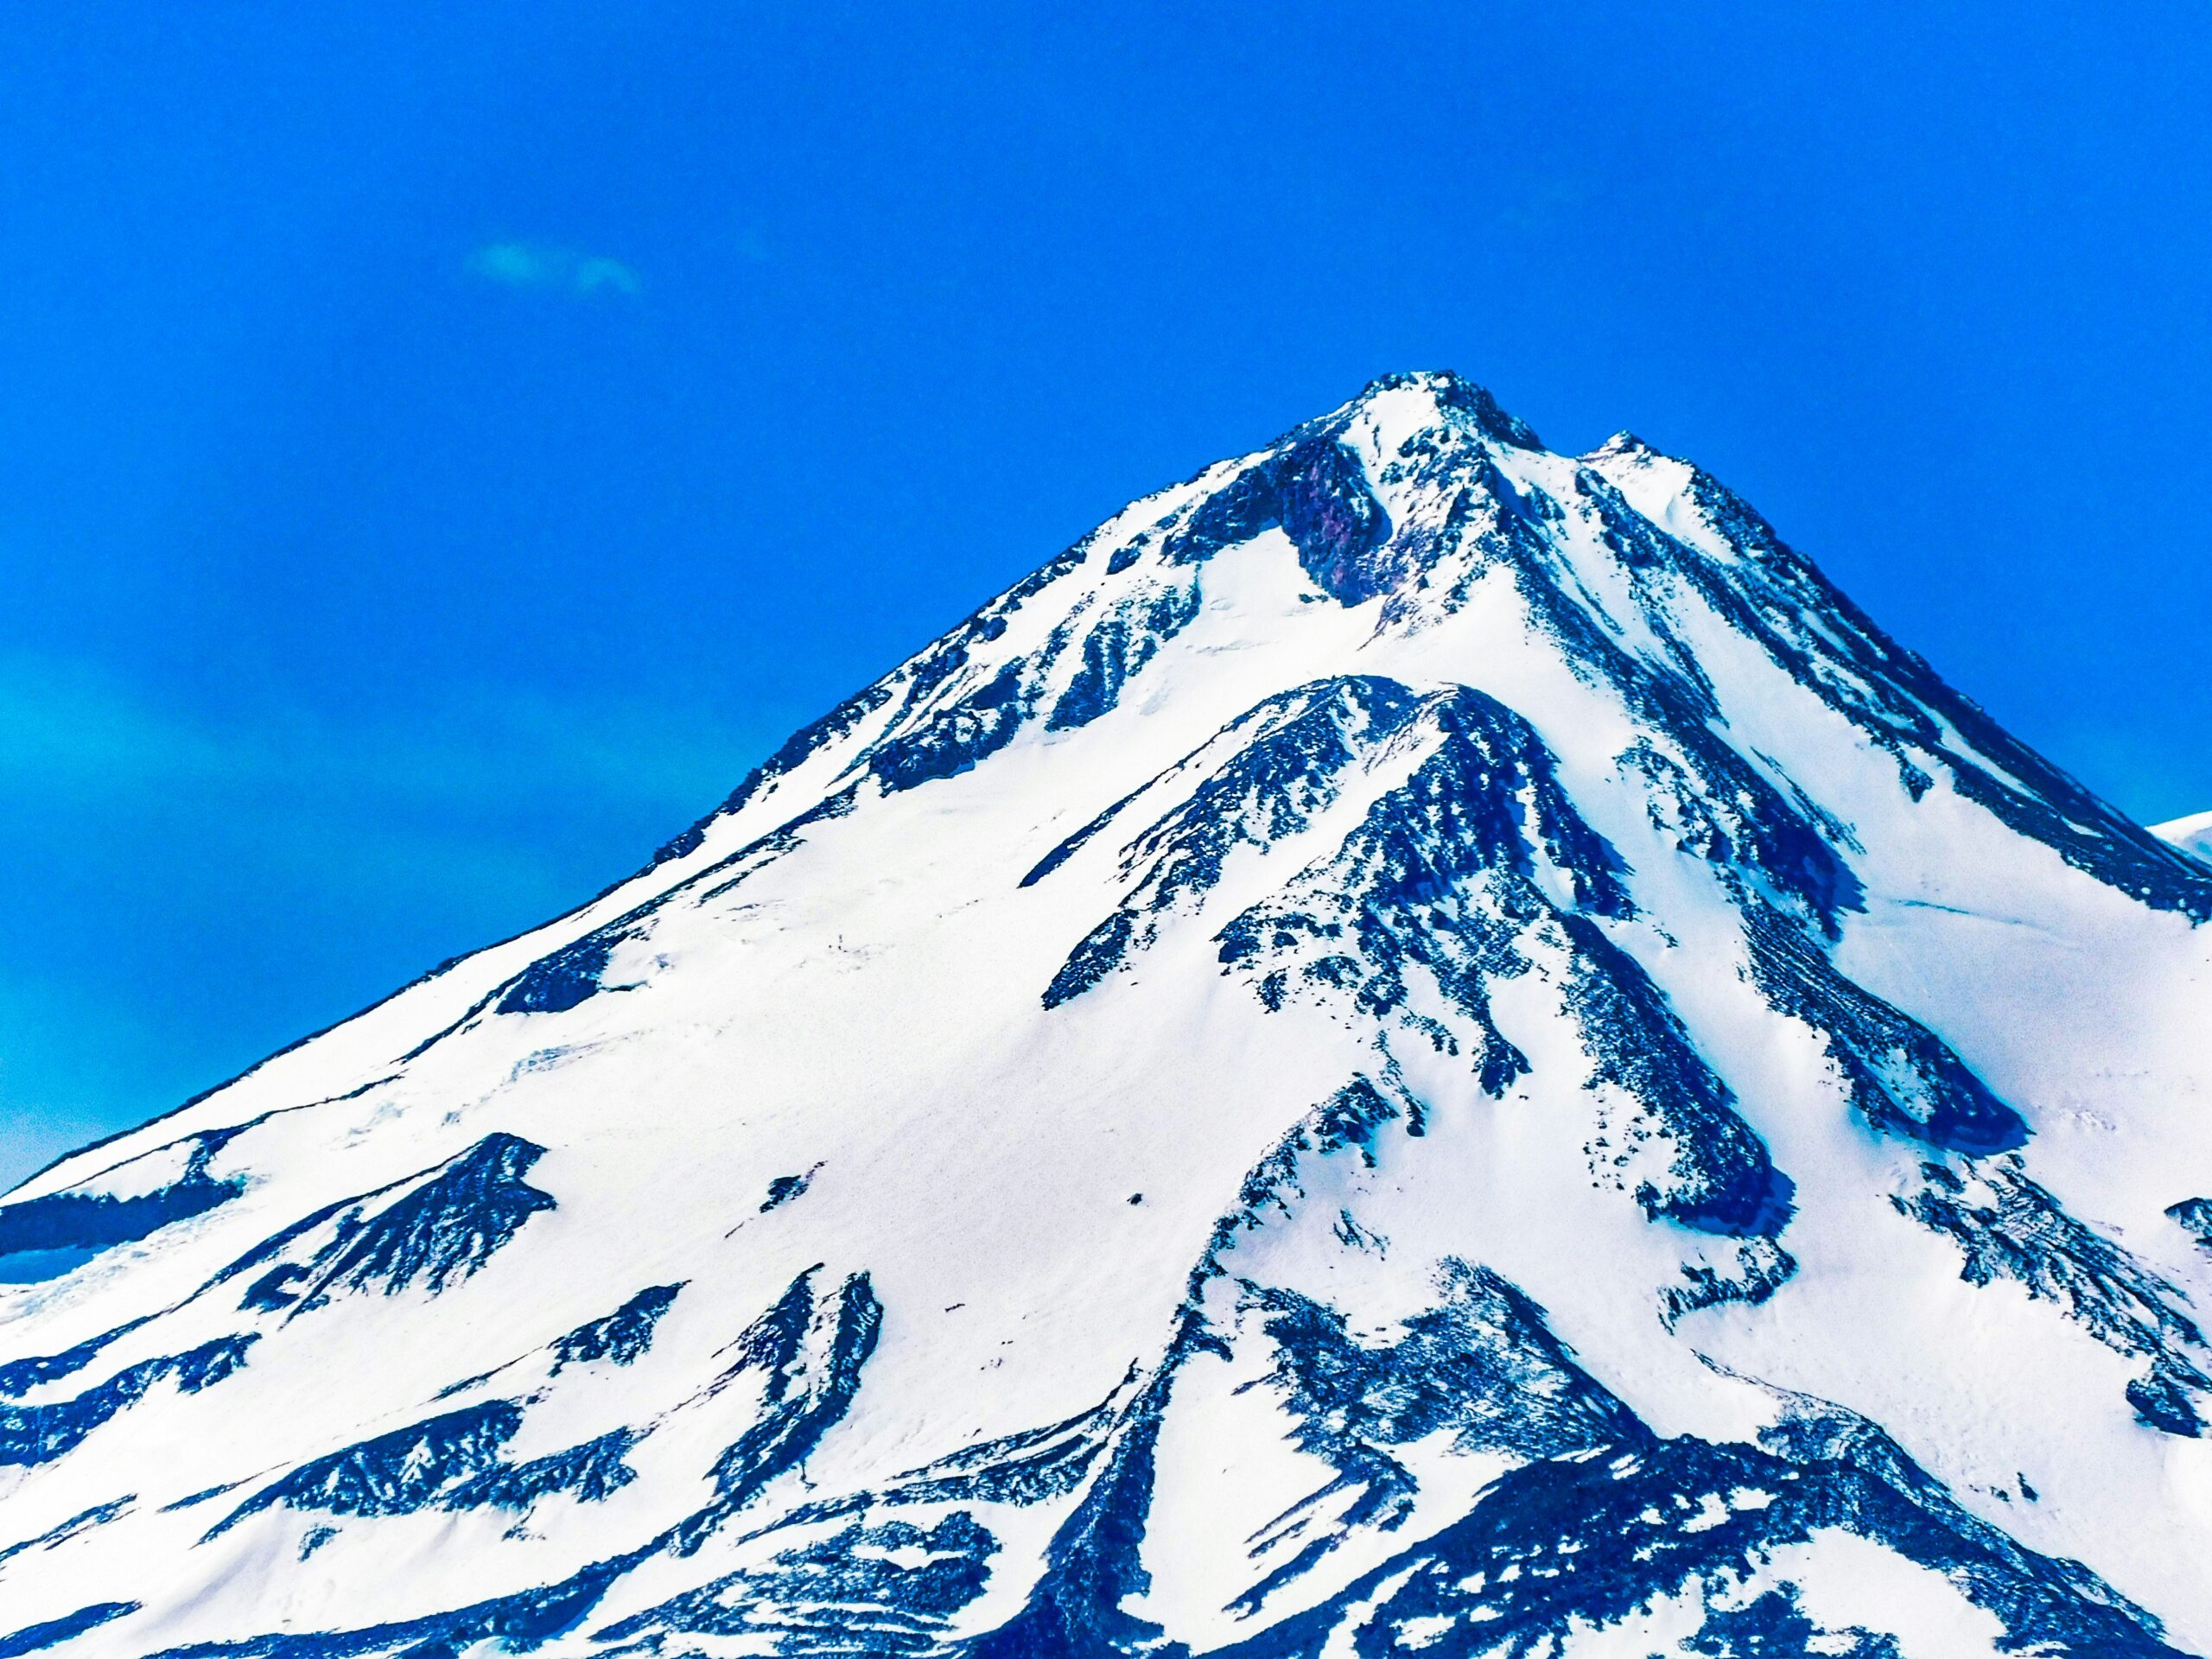 Can I Hike Mount Shasta With A Drone For Photography?